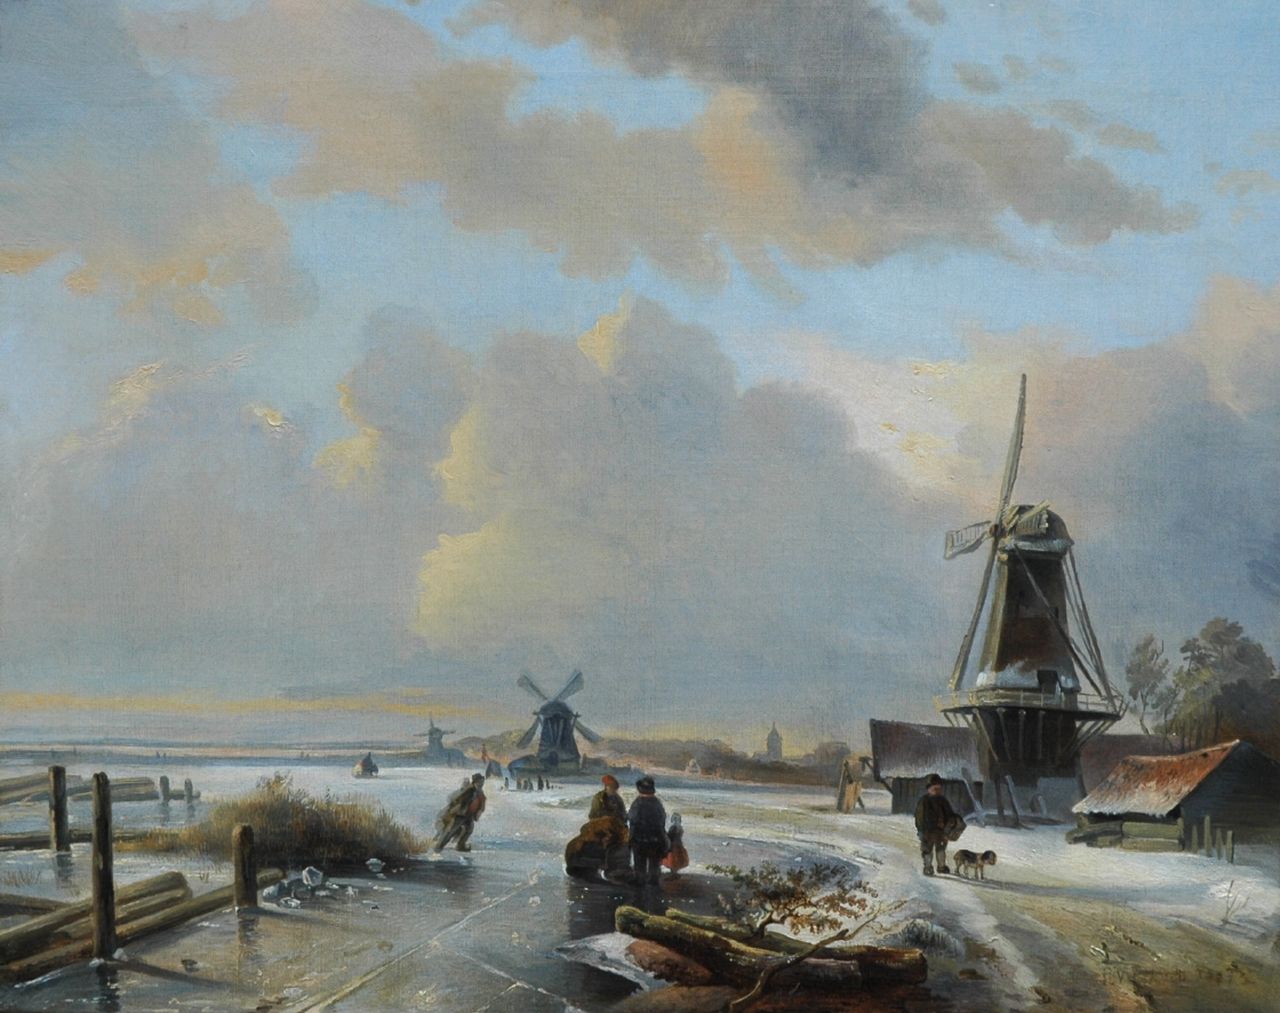 Pieter Voskuil | A winter landscape with skaters on a frozen waterway, oil on canvas, 39.1 x 48.8 cm, signed l.r. and dated 1837